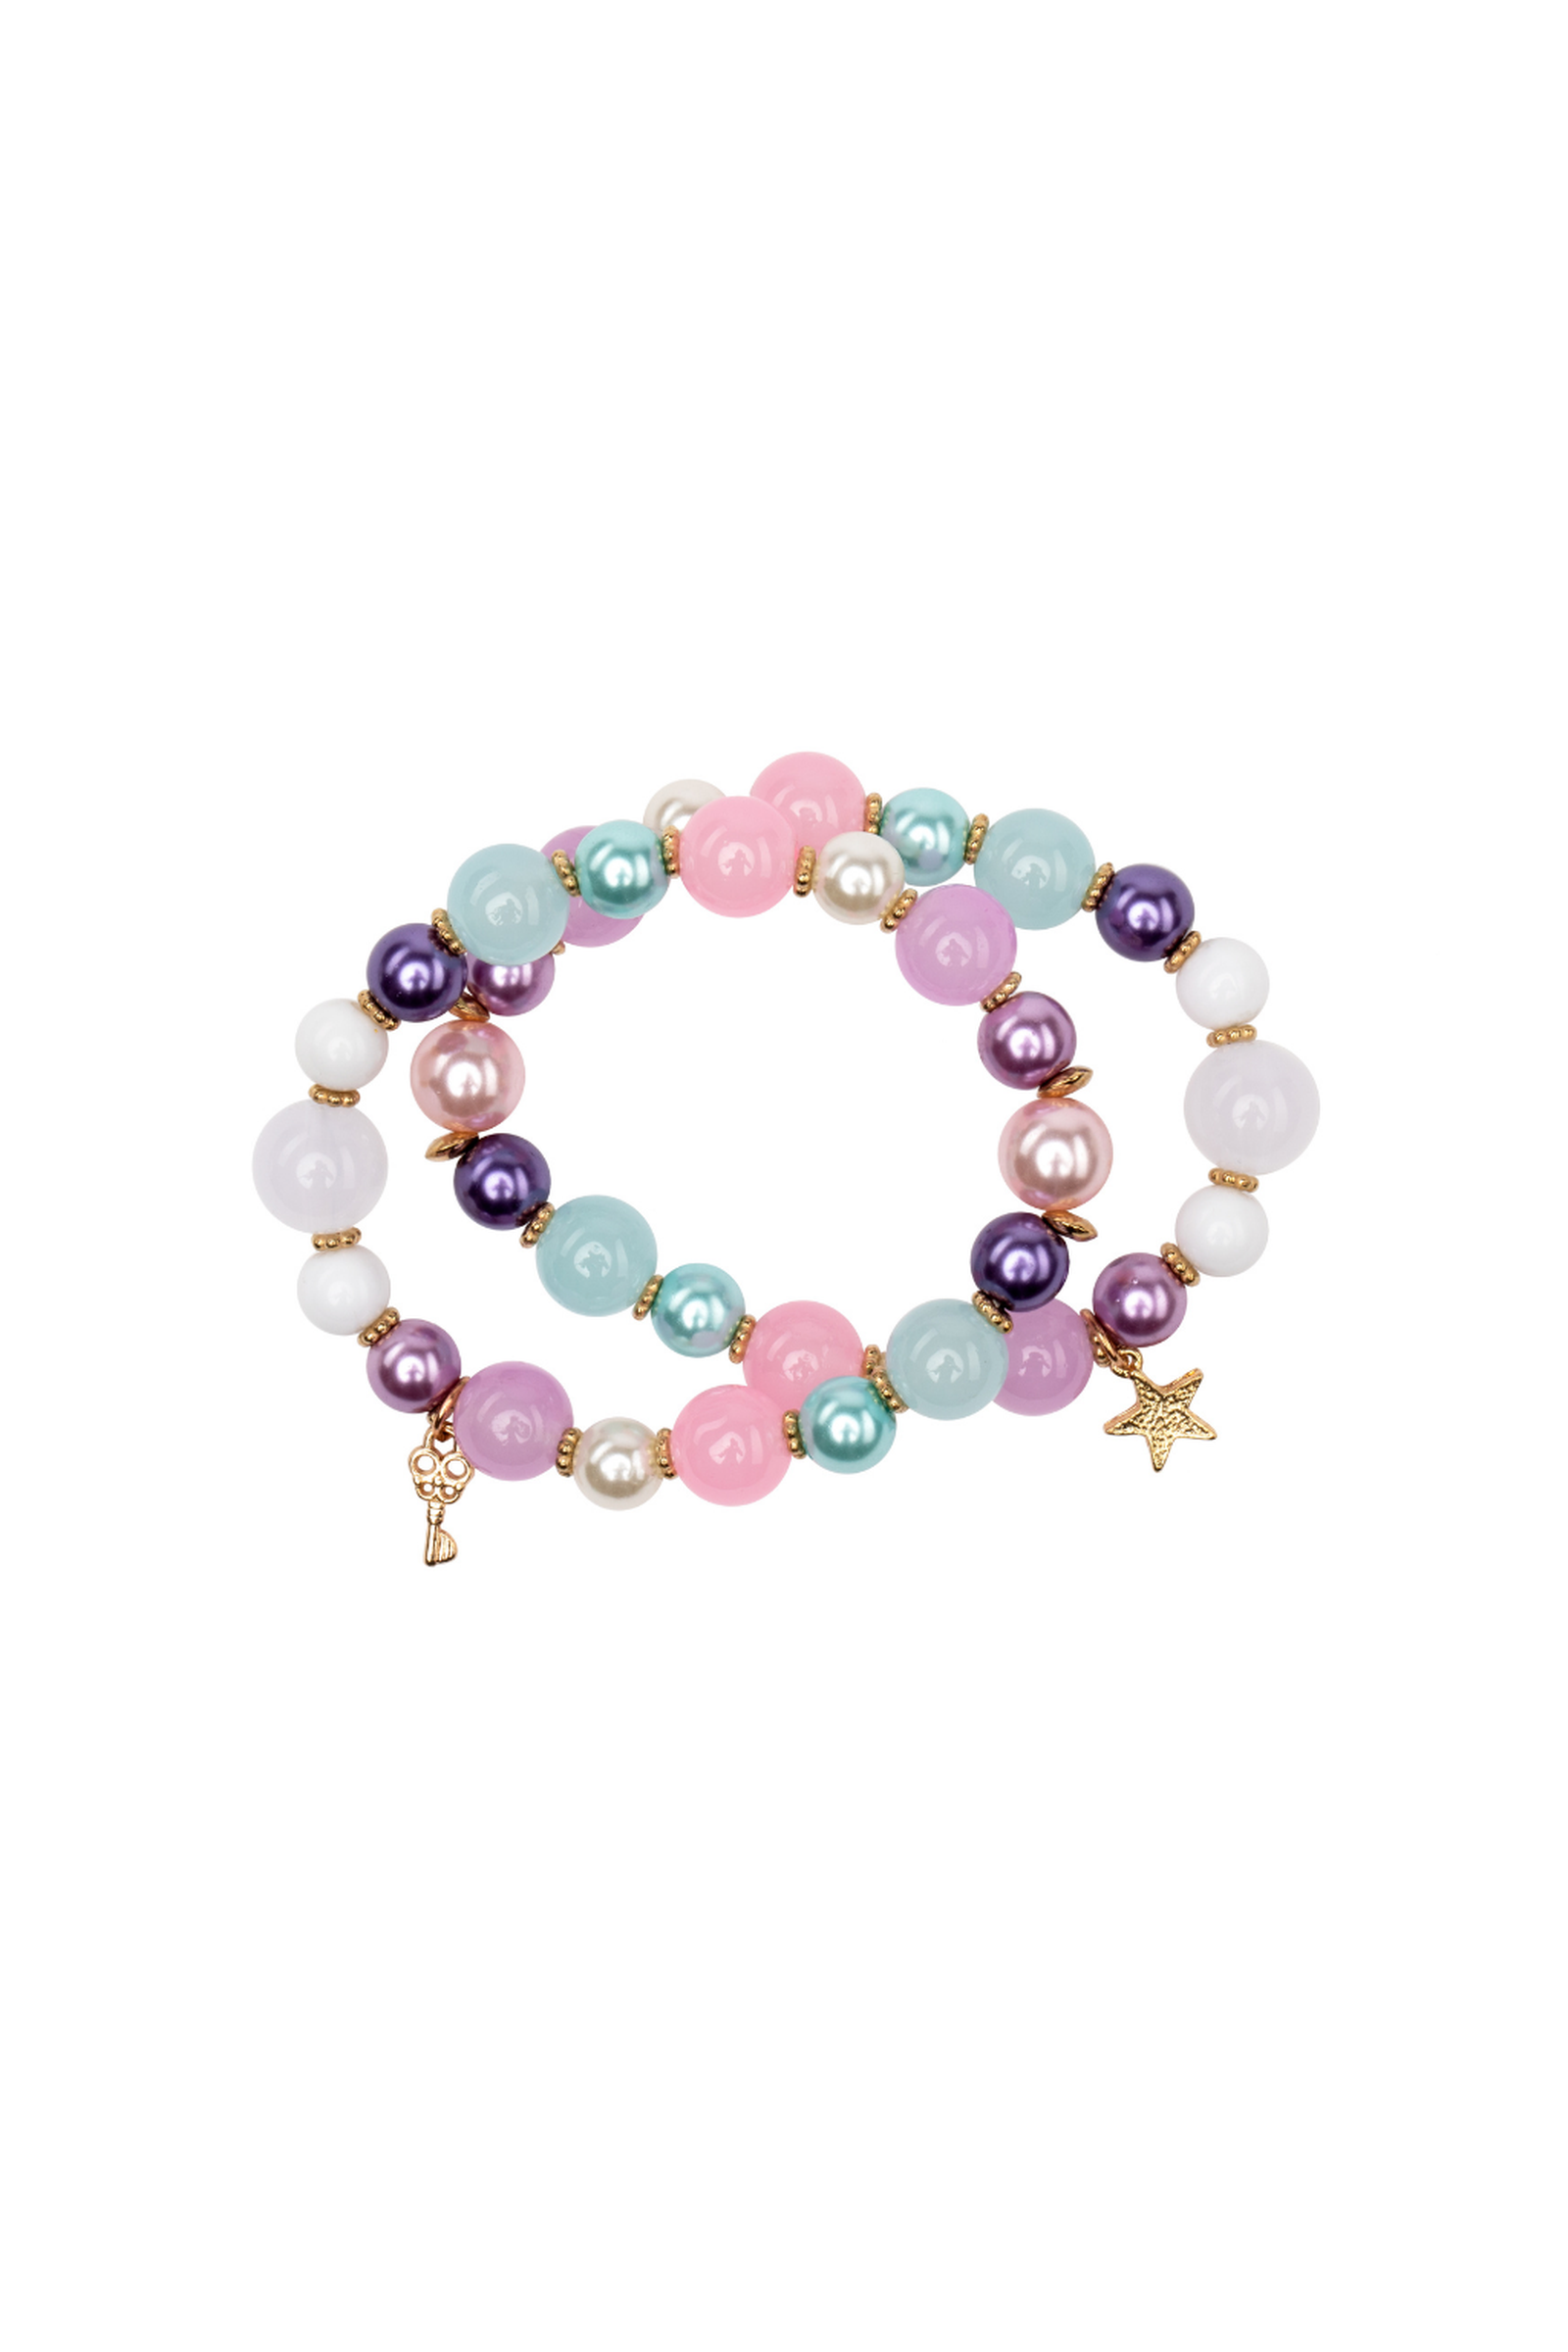 the boutique star and key bracelets on a white background